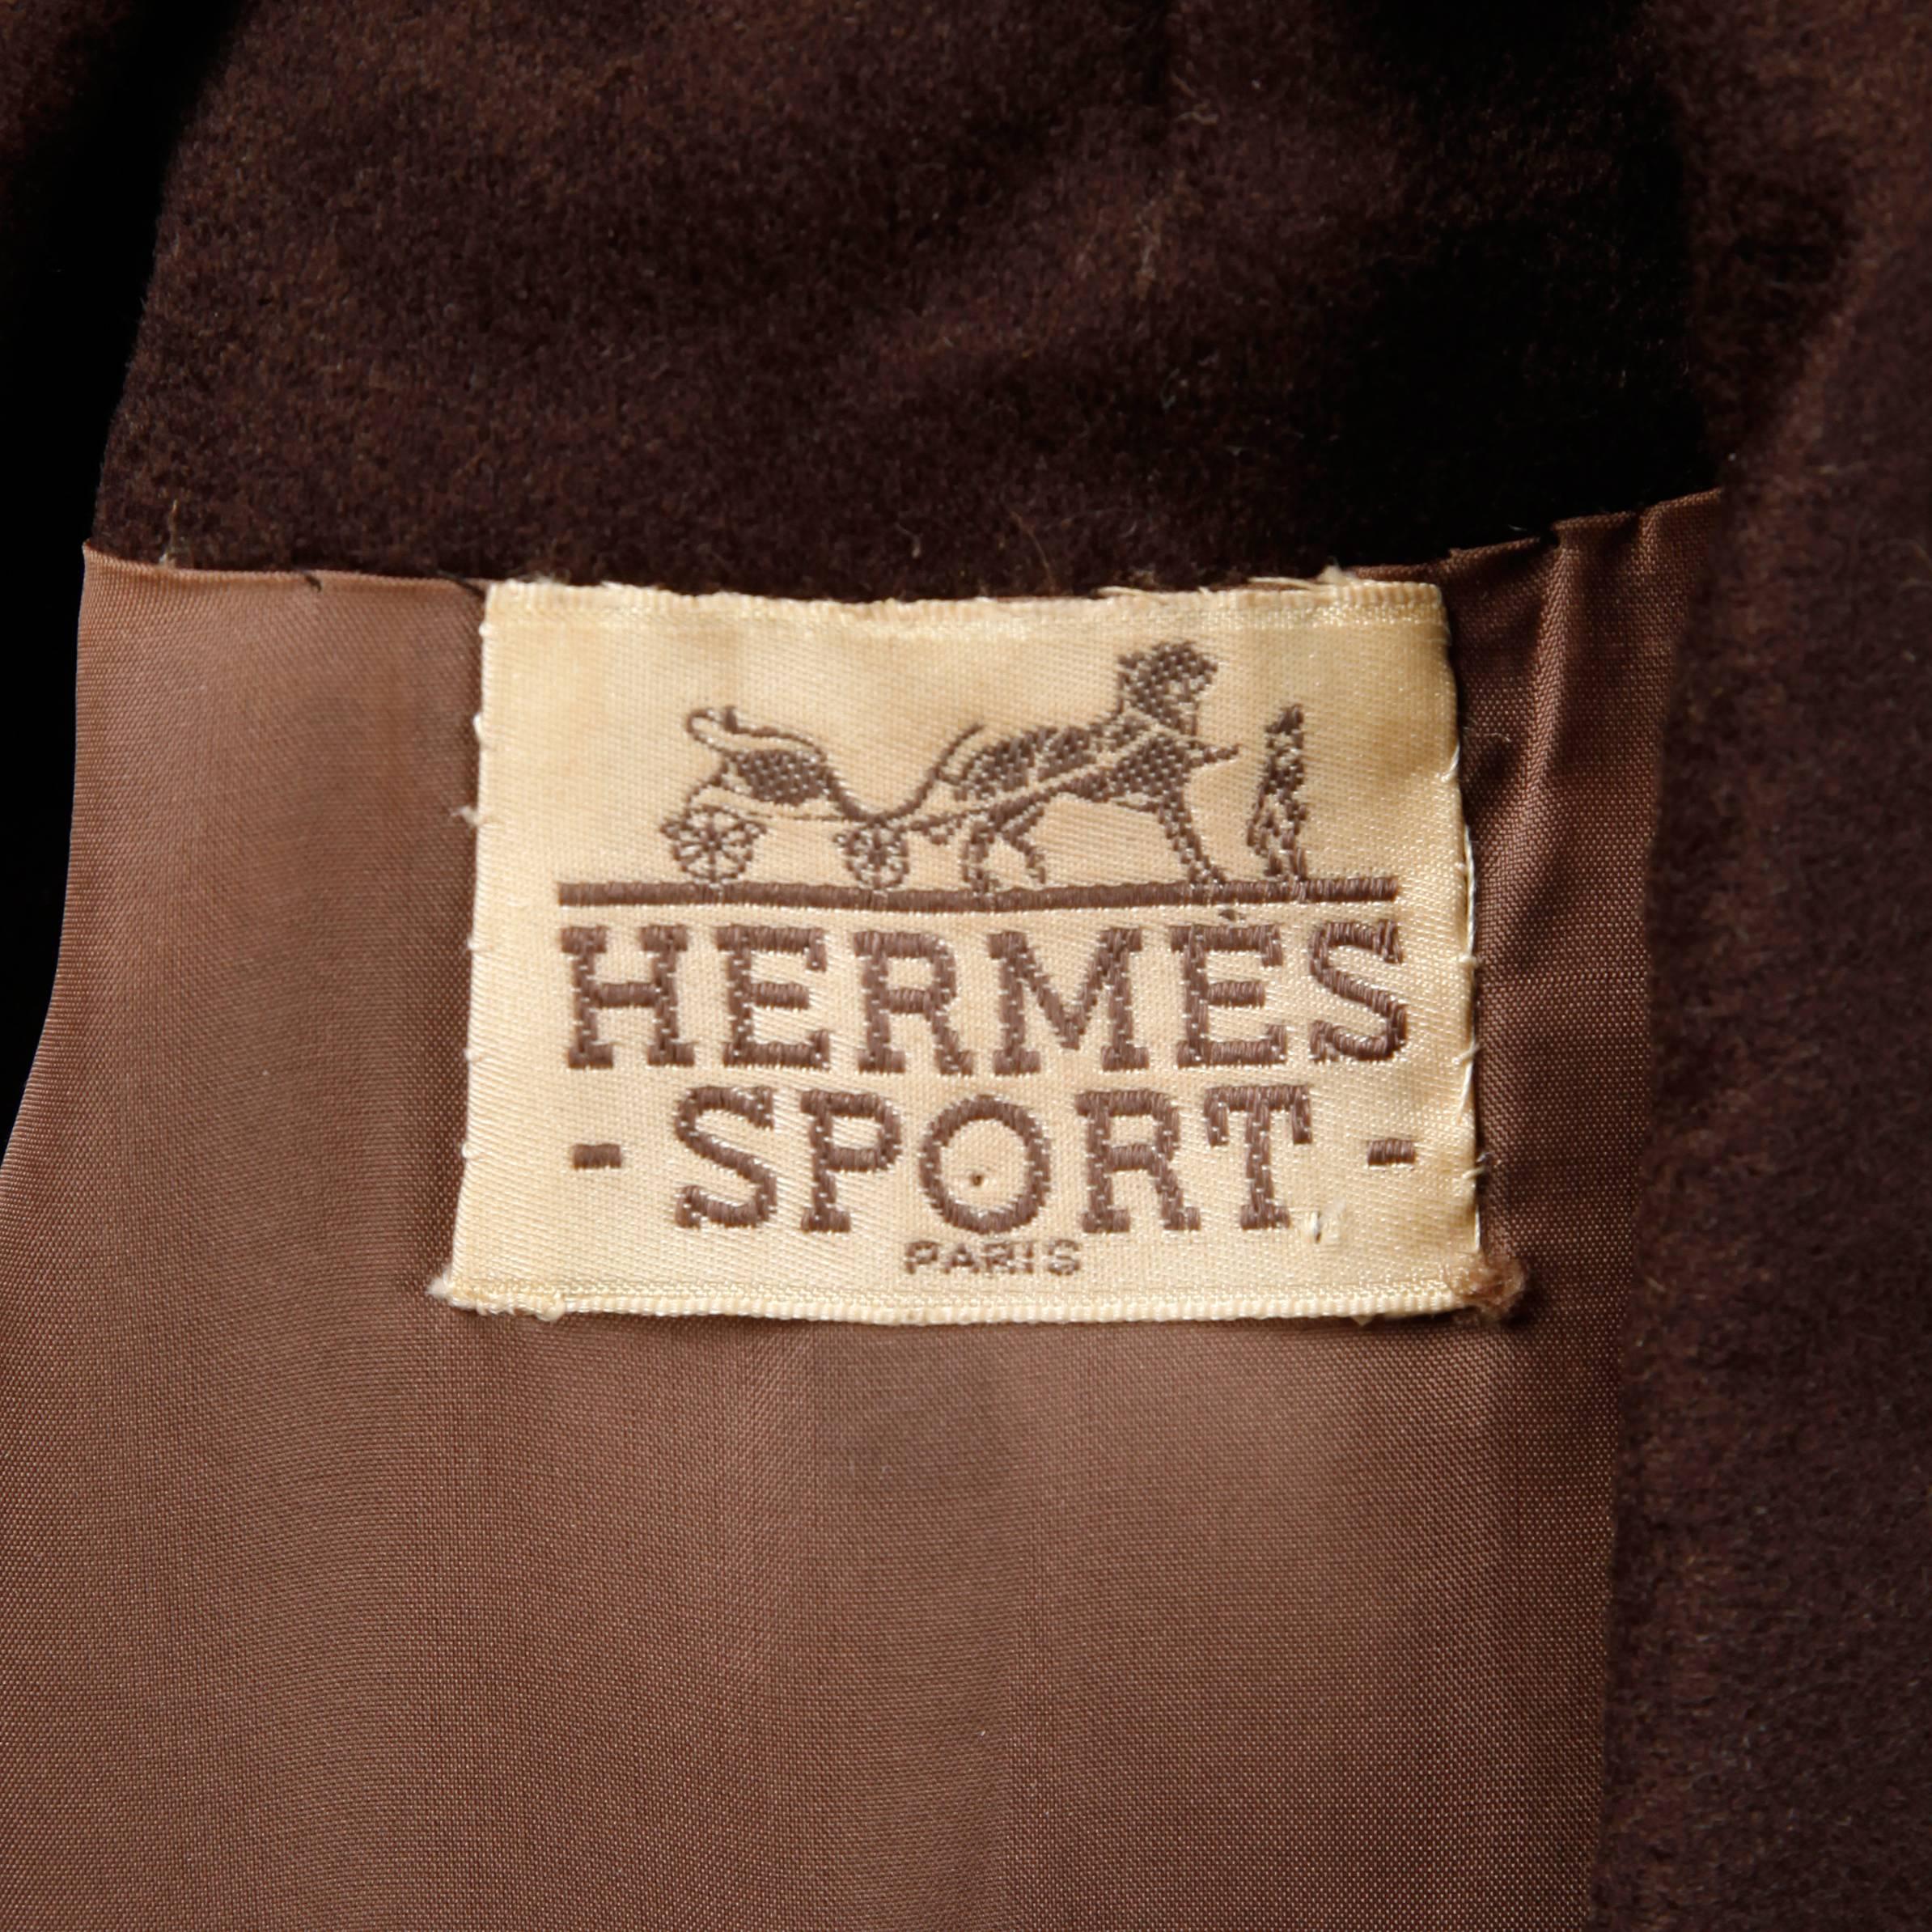 Absolutely stunning vintage coat dress by Hermes Sport in what feels like a chocolate brown cashmere (fabric content is unmarked). Couture hand stitched creamy brown silk lining. Flawless construction and matching 